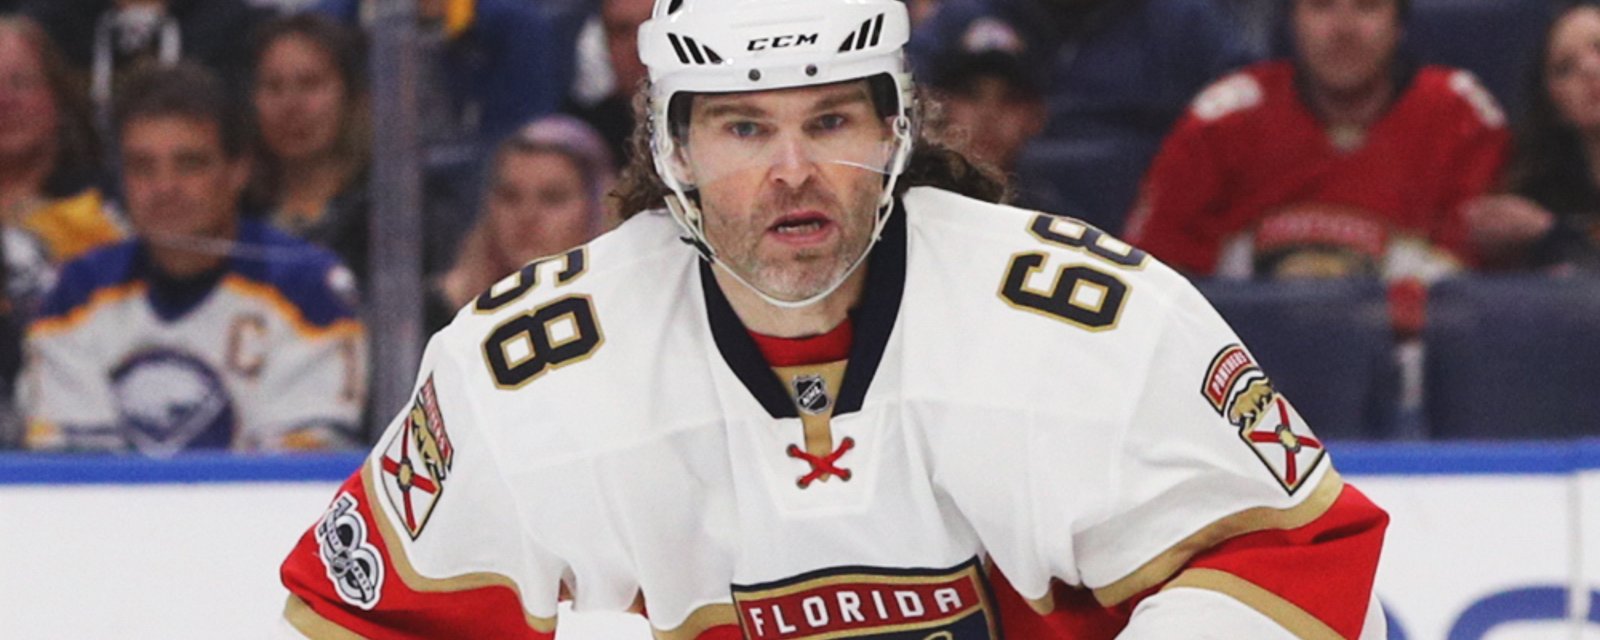 Report: Canadian team reportedly not interested in signing Jagr